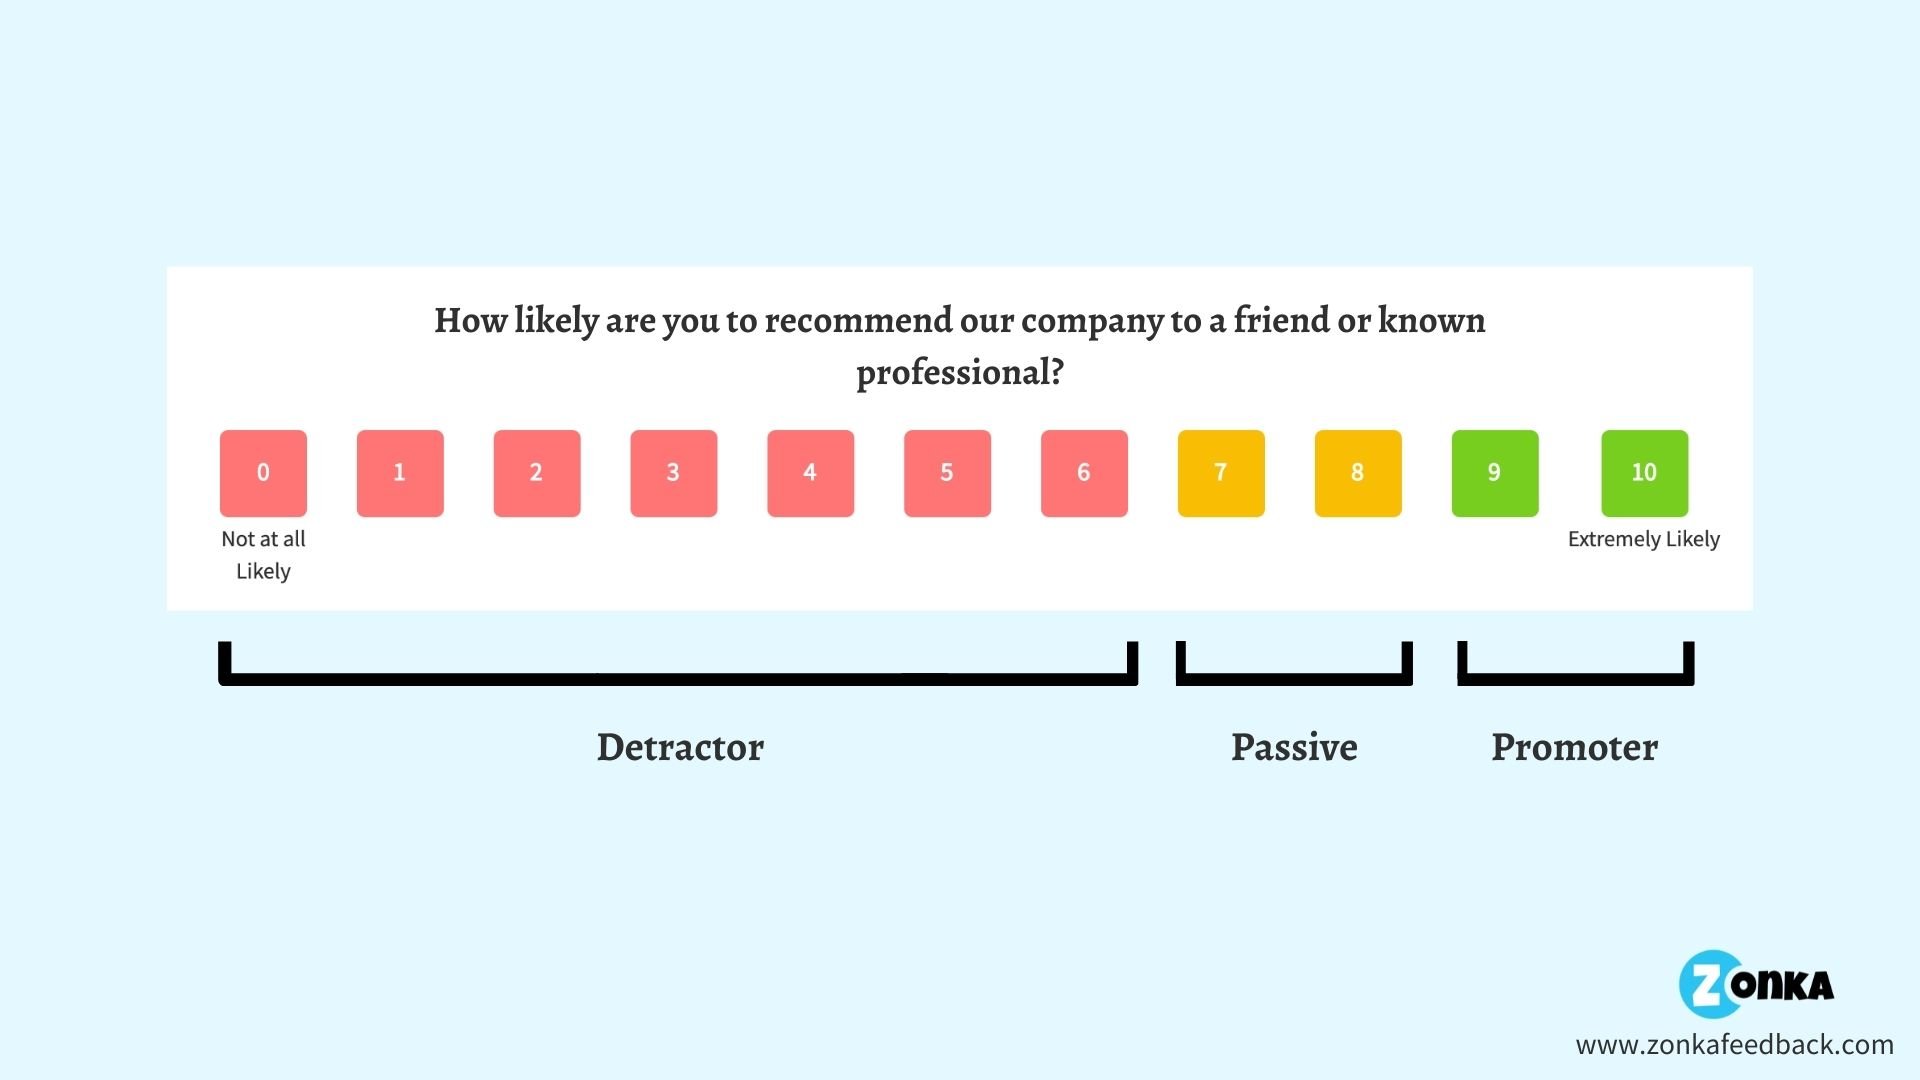 employee Net Promoter Score Question with Promoter, Passive, and Detractor on a 0-10 rating scale